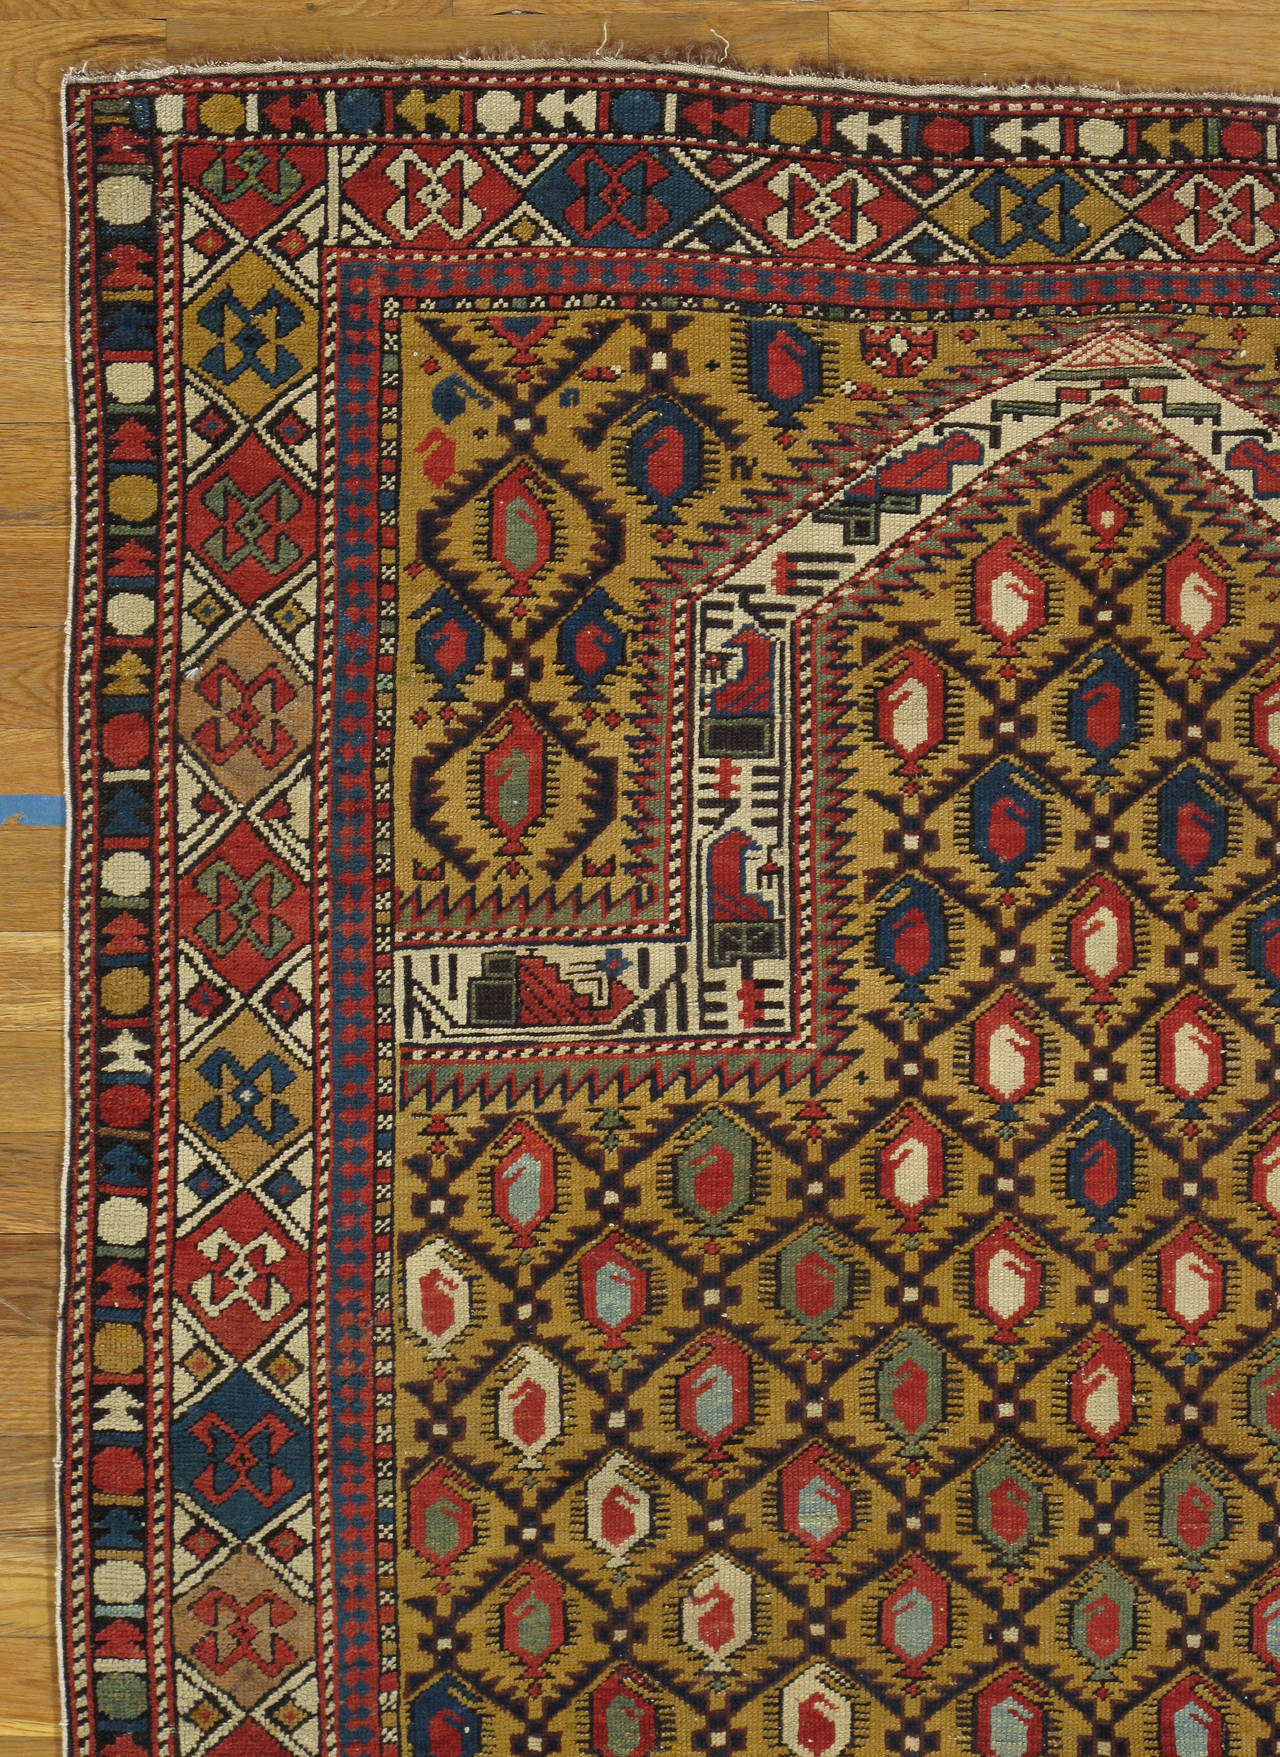 Unique Marasali prayer rug attributed to the Marasali group, this prayer rug from the Shirvan region has a brilliant golden-yellow field and a diamond lattice design in which angular botehs form color diagonals in relation to the central axis.